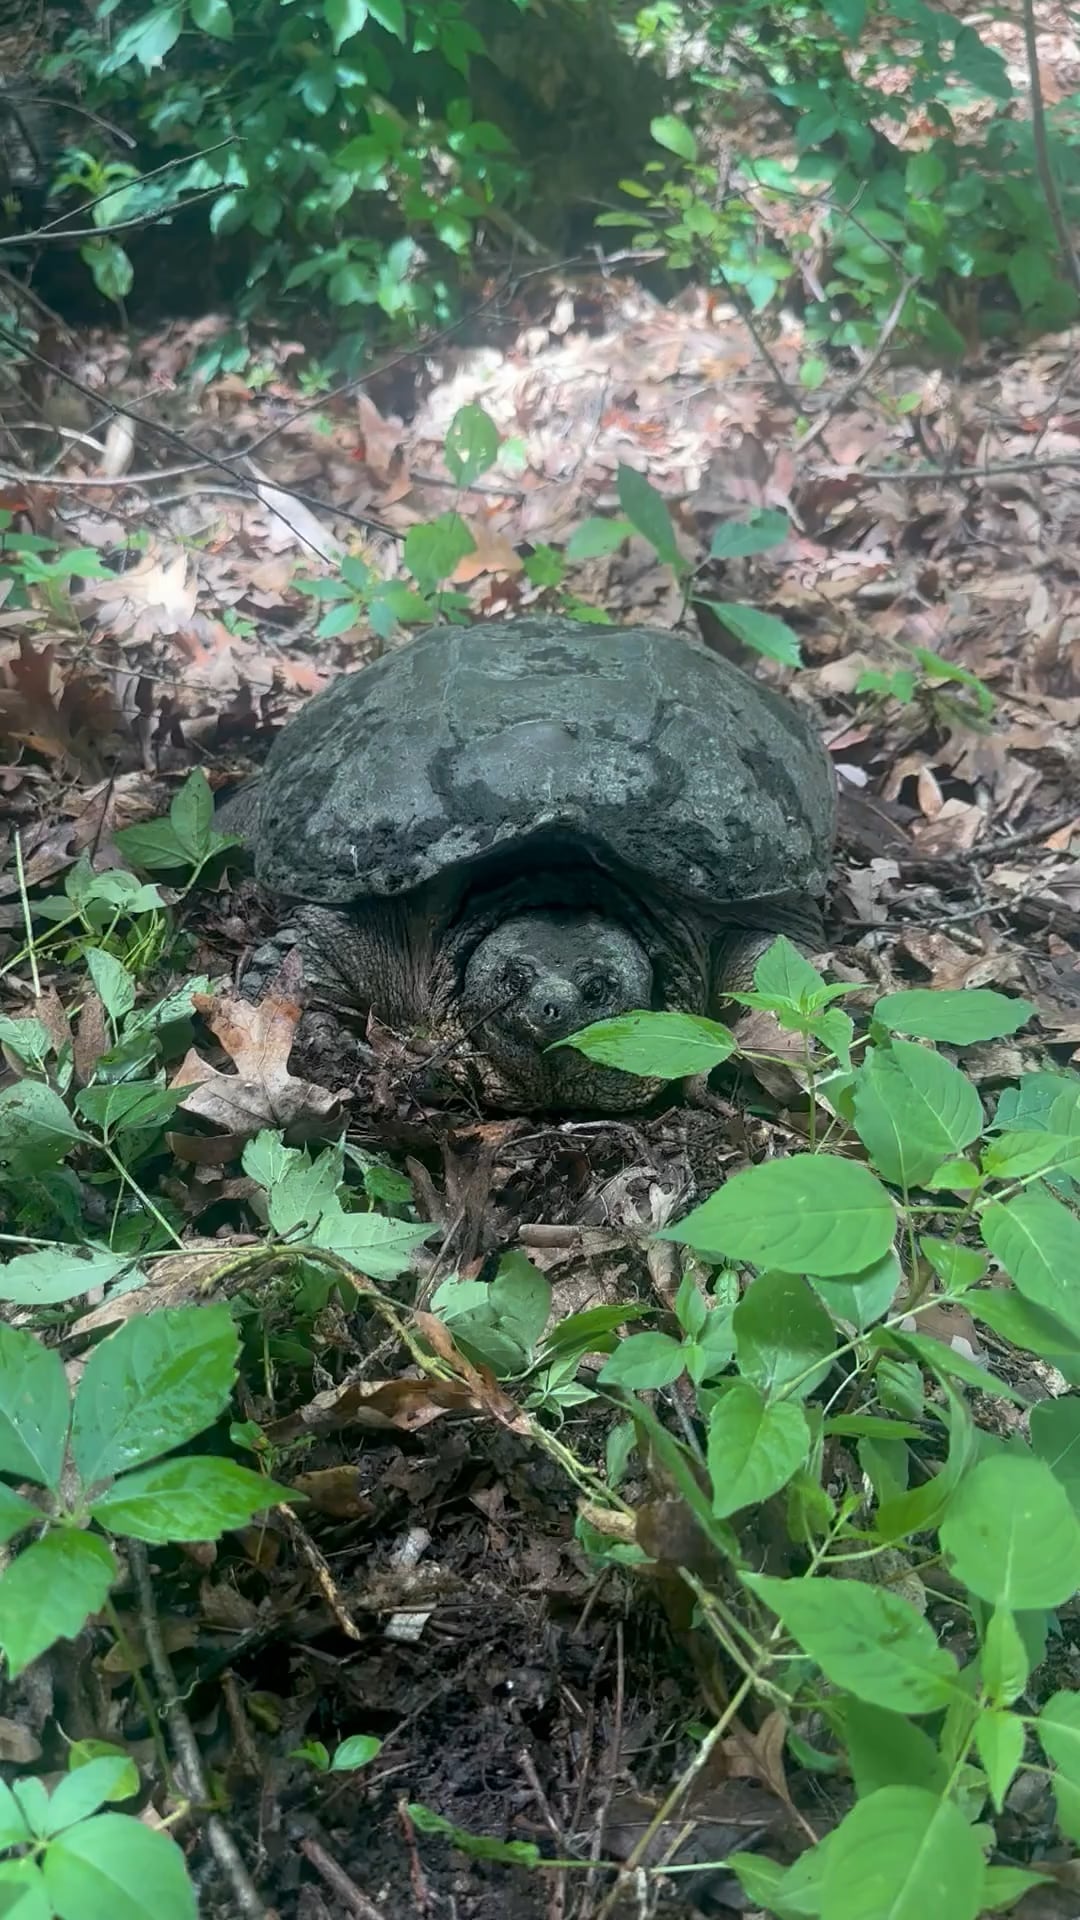 Why are Snapping Turtles So Aggressive?